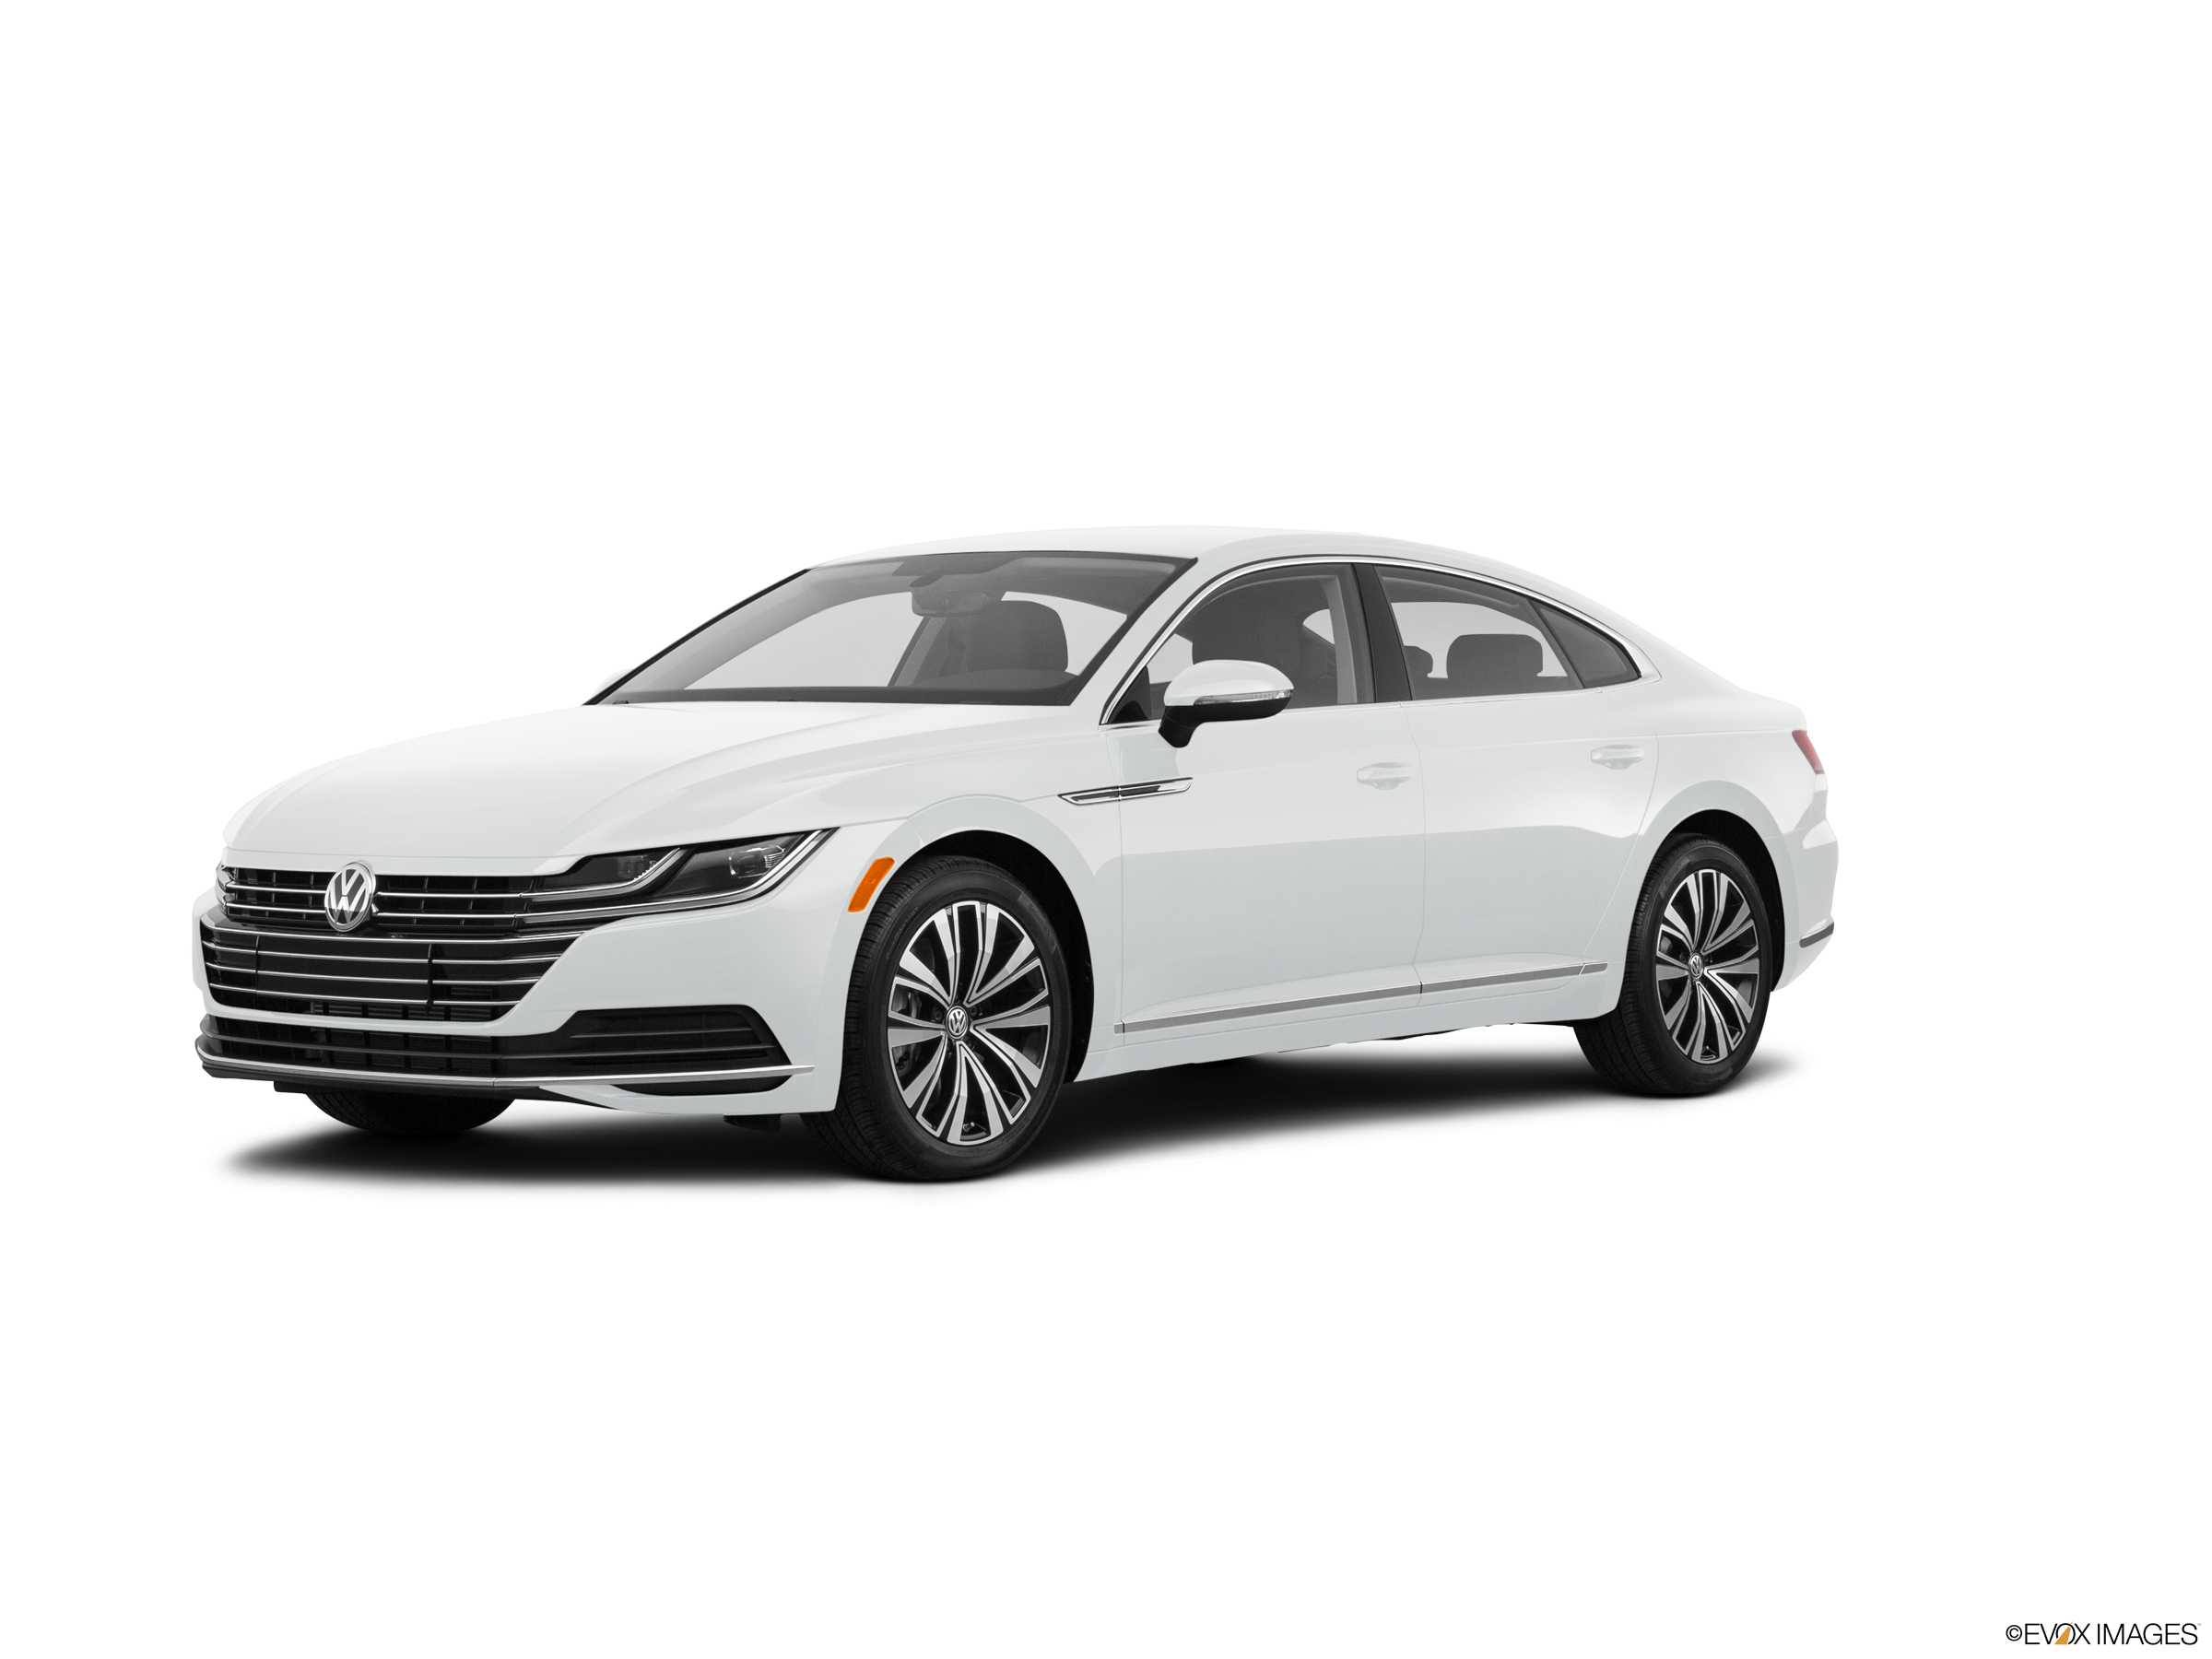 2019 Volkswagen Arteon Review: You Get What You Pay For